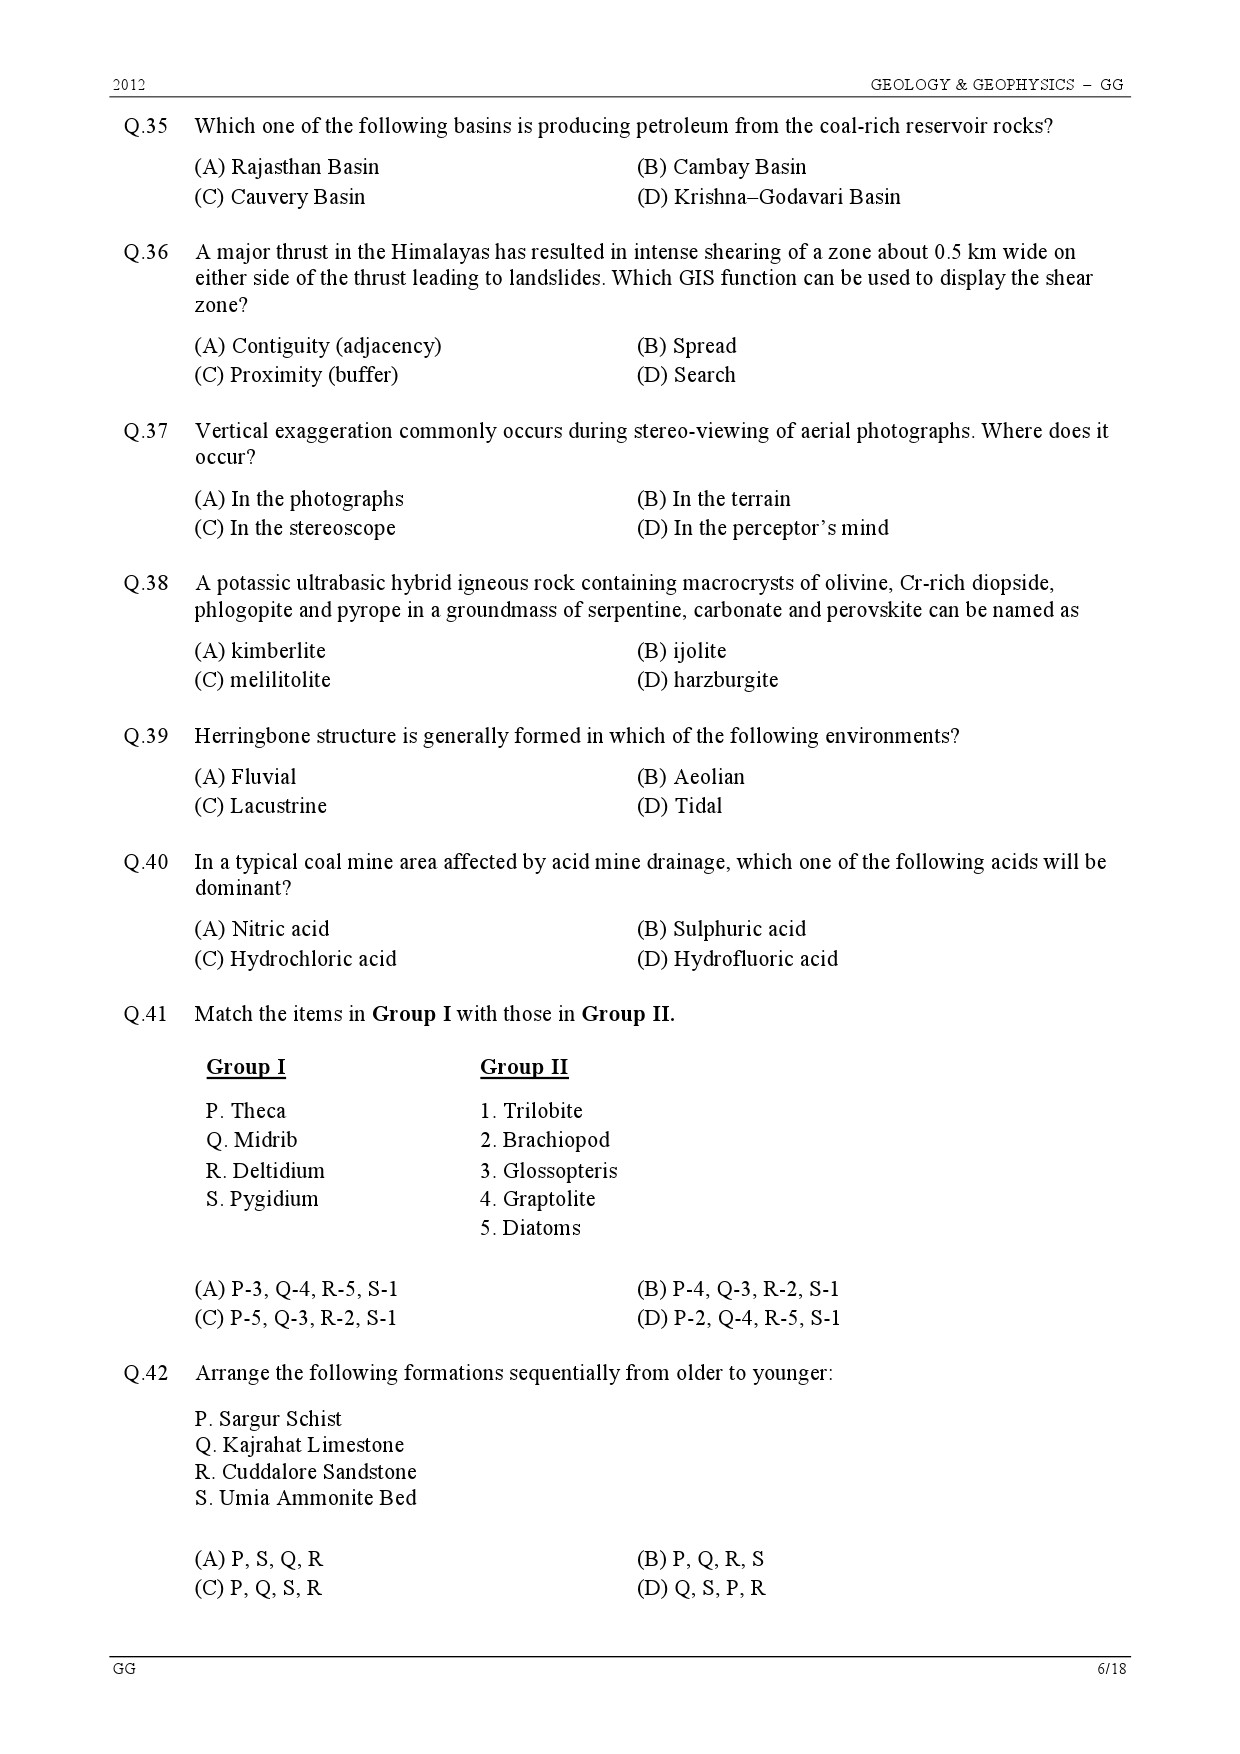 GATE Exam Question Paper 2012 Geology and Geophysics 6